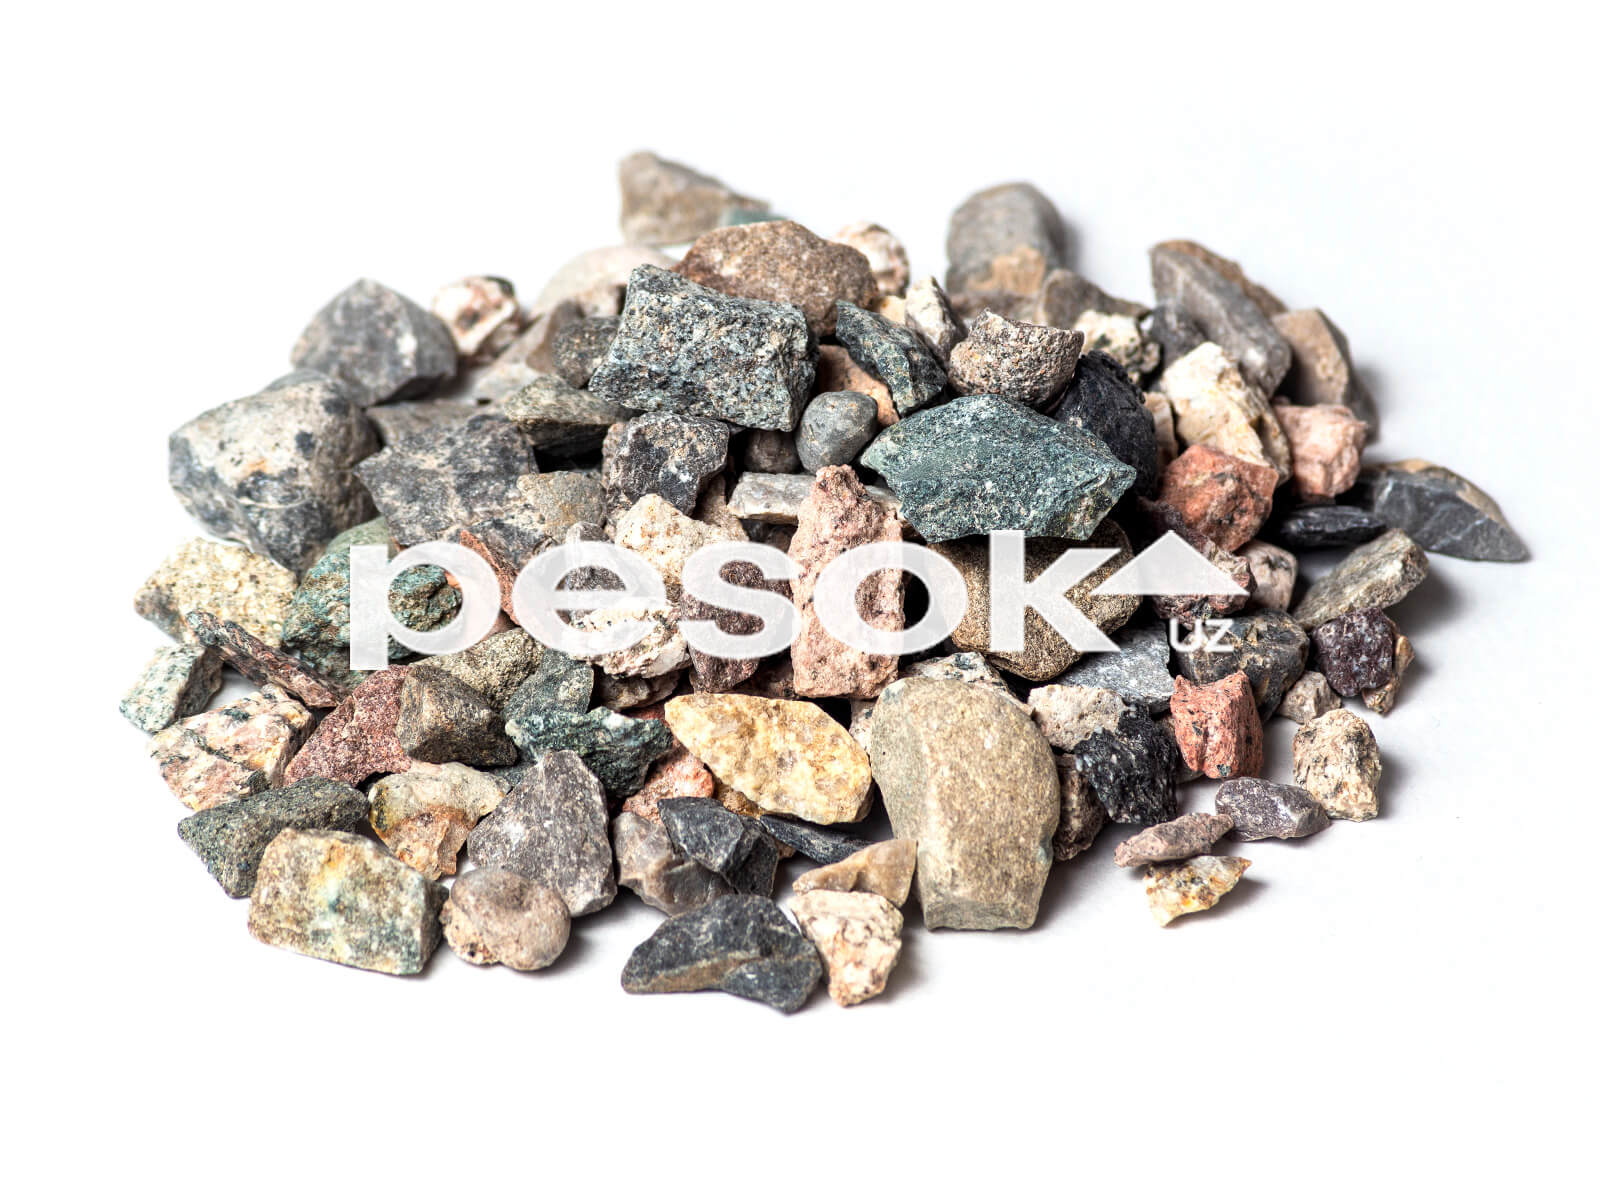 Crushed stone (5-20 mm)